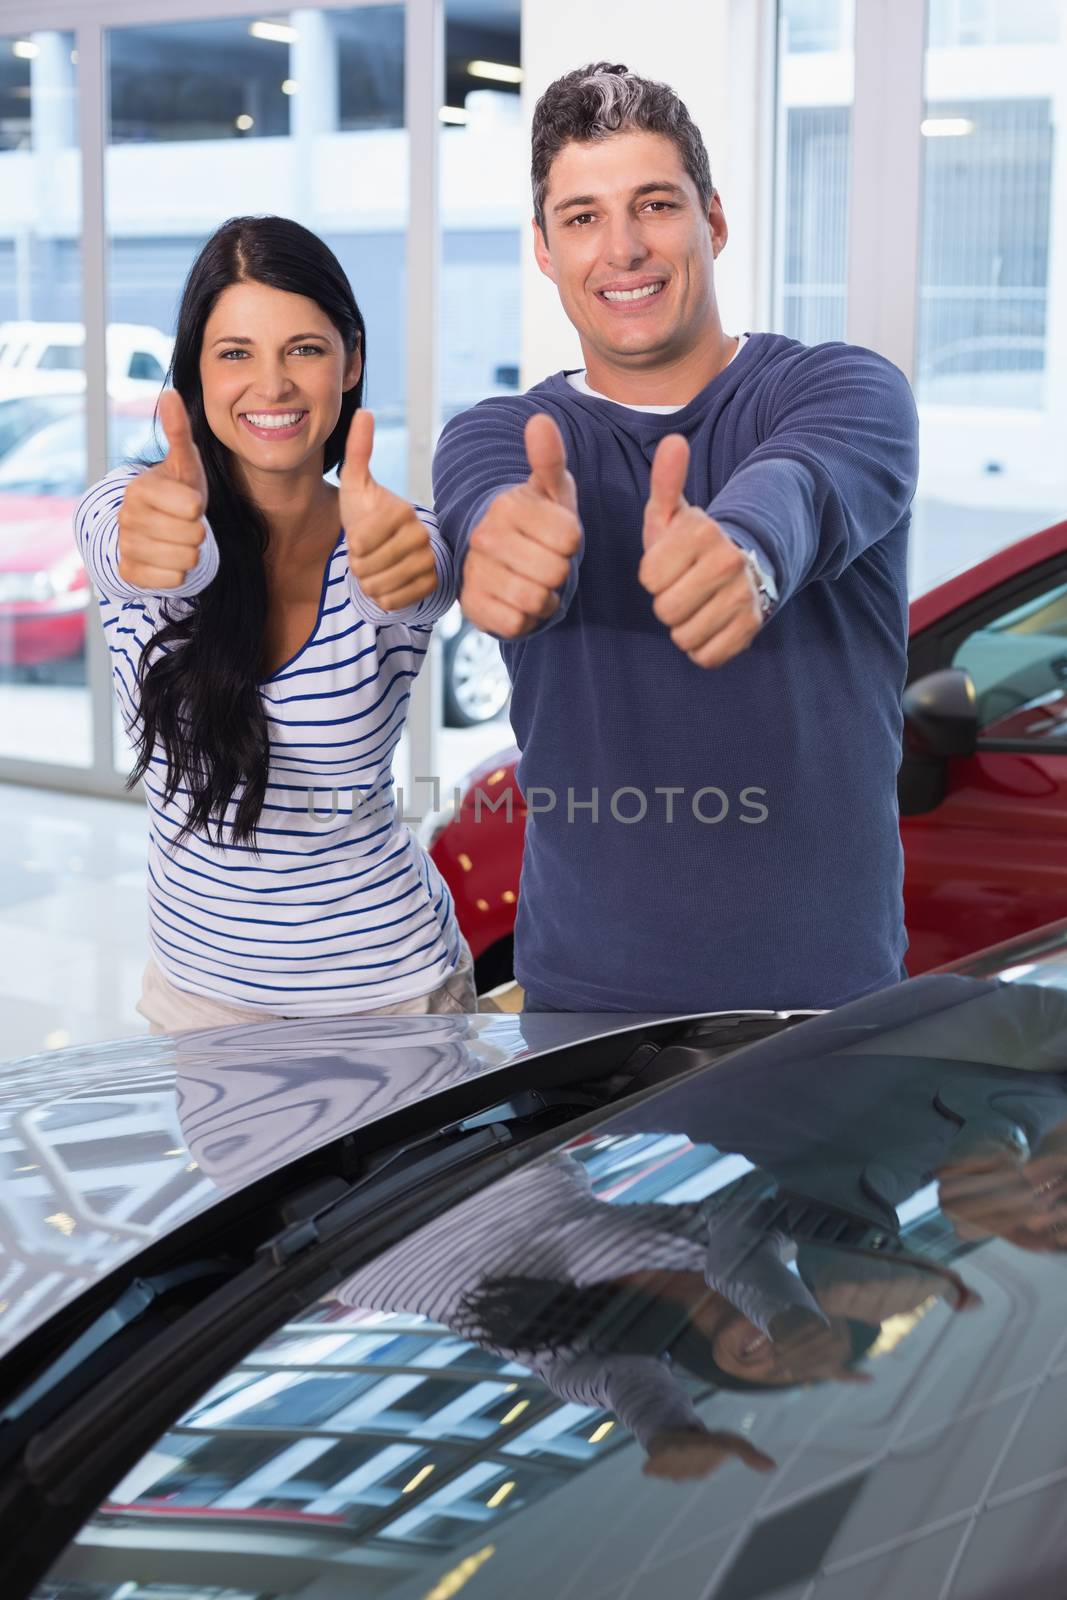 Smiling couple giving thumbs up by Wavebreakmedia